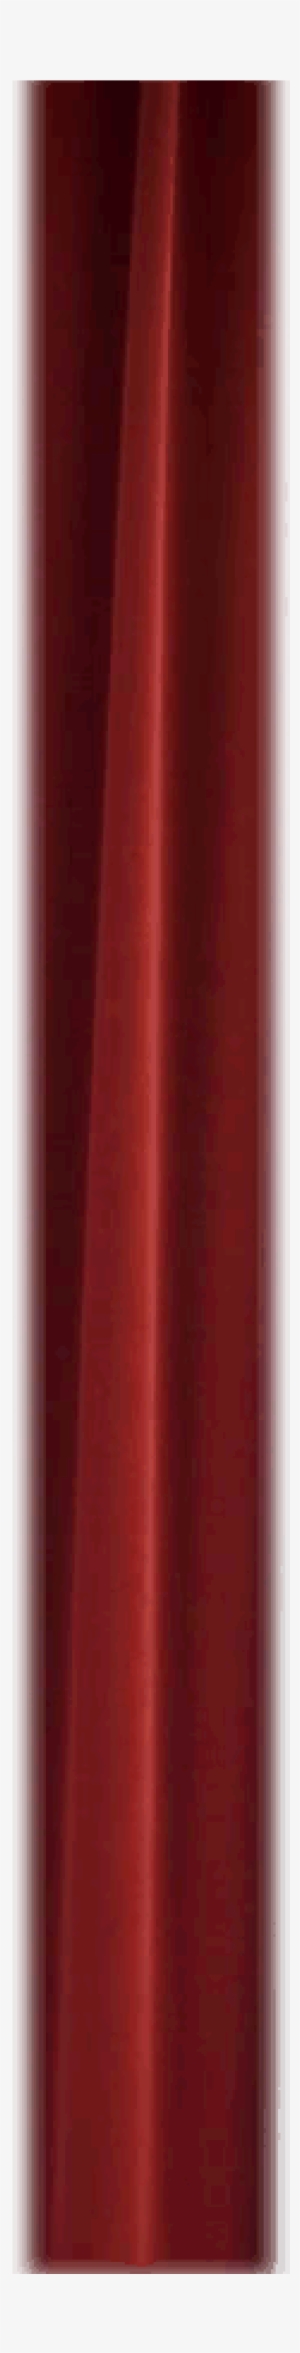 Section Of Curtain And Place It Inside A Transparent - Wood